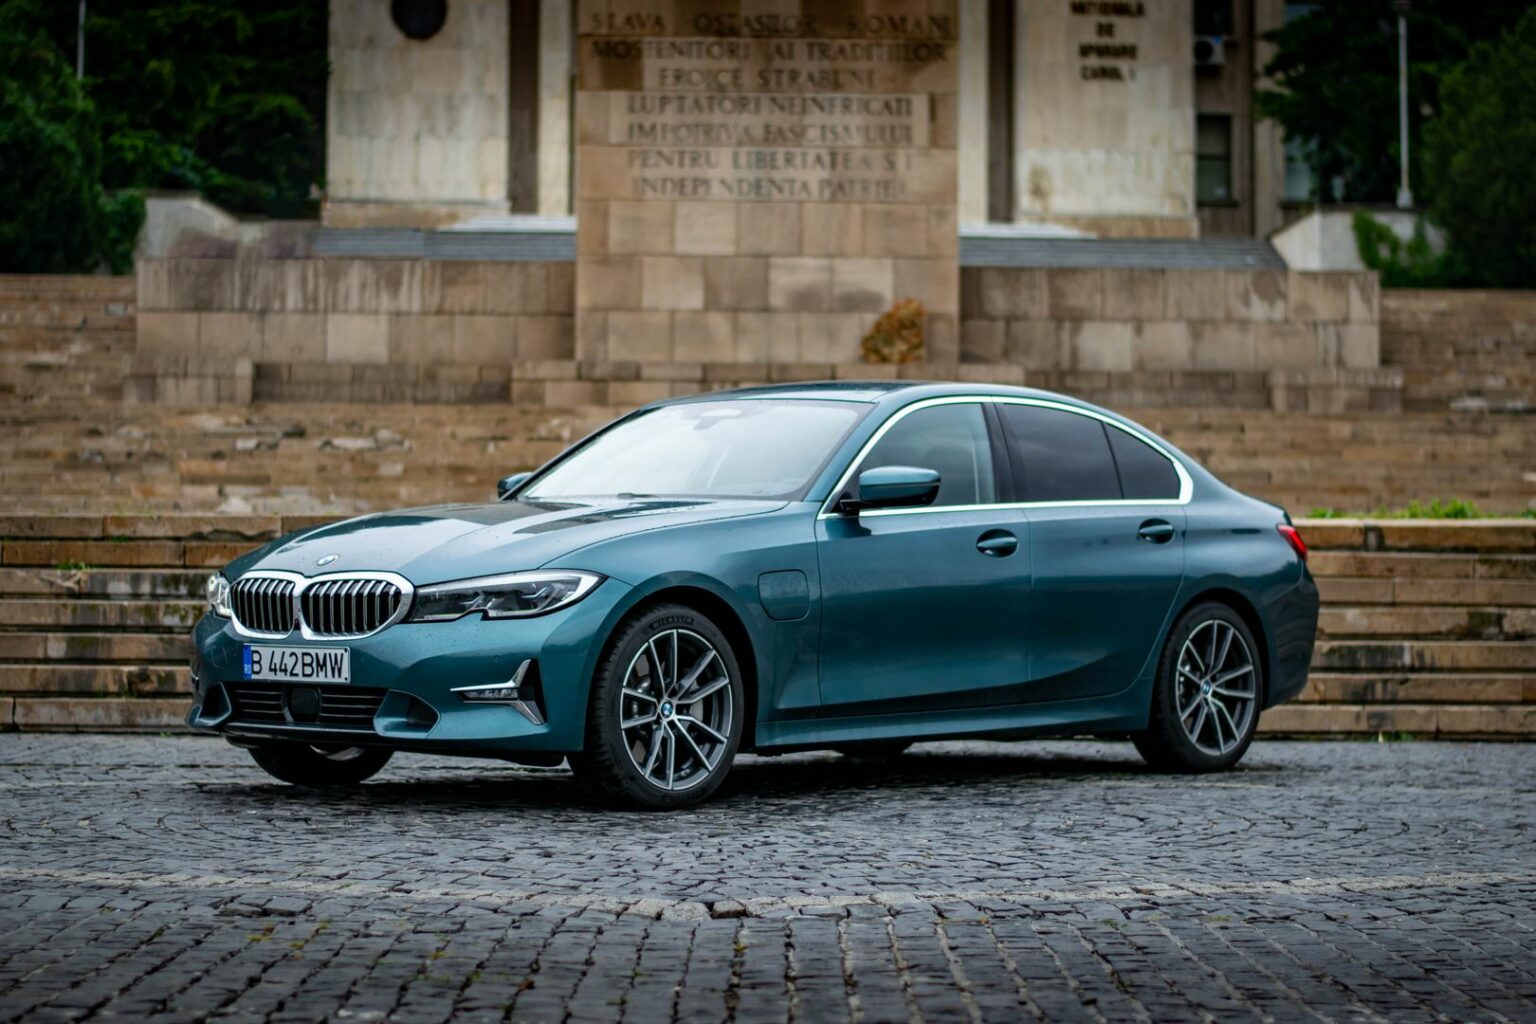 Which BMW Hybrid Cars Are For Sale in 2021